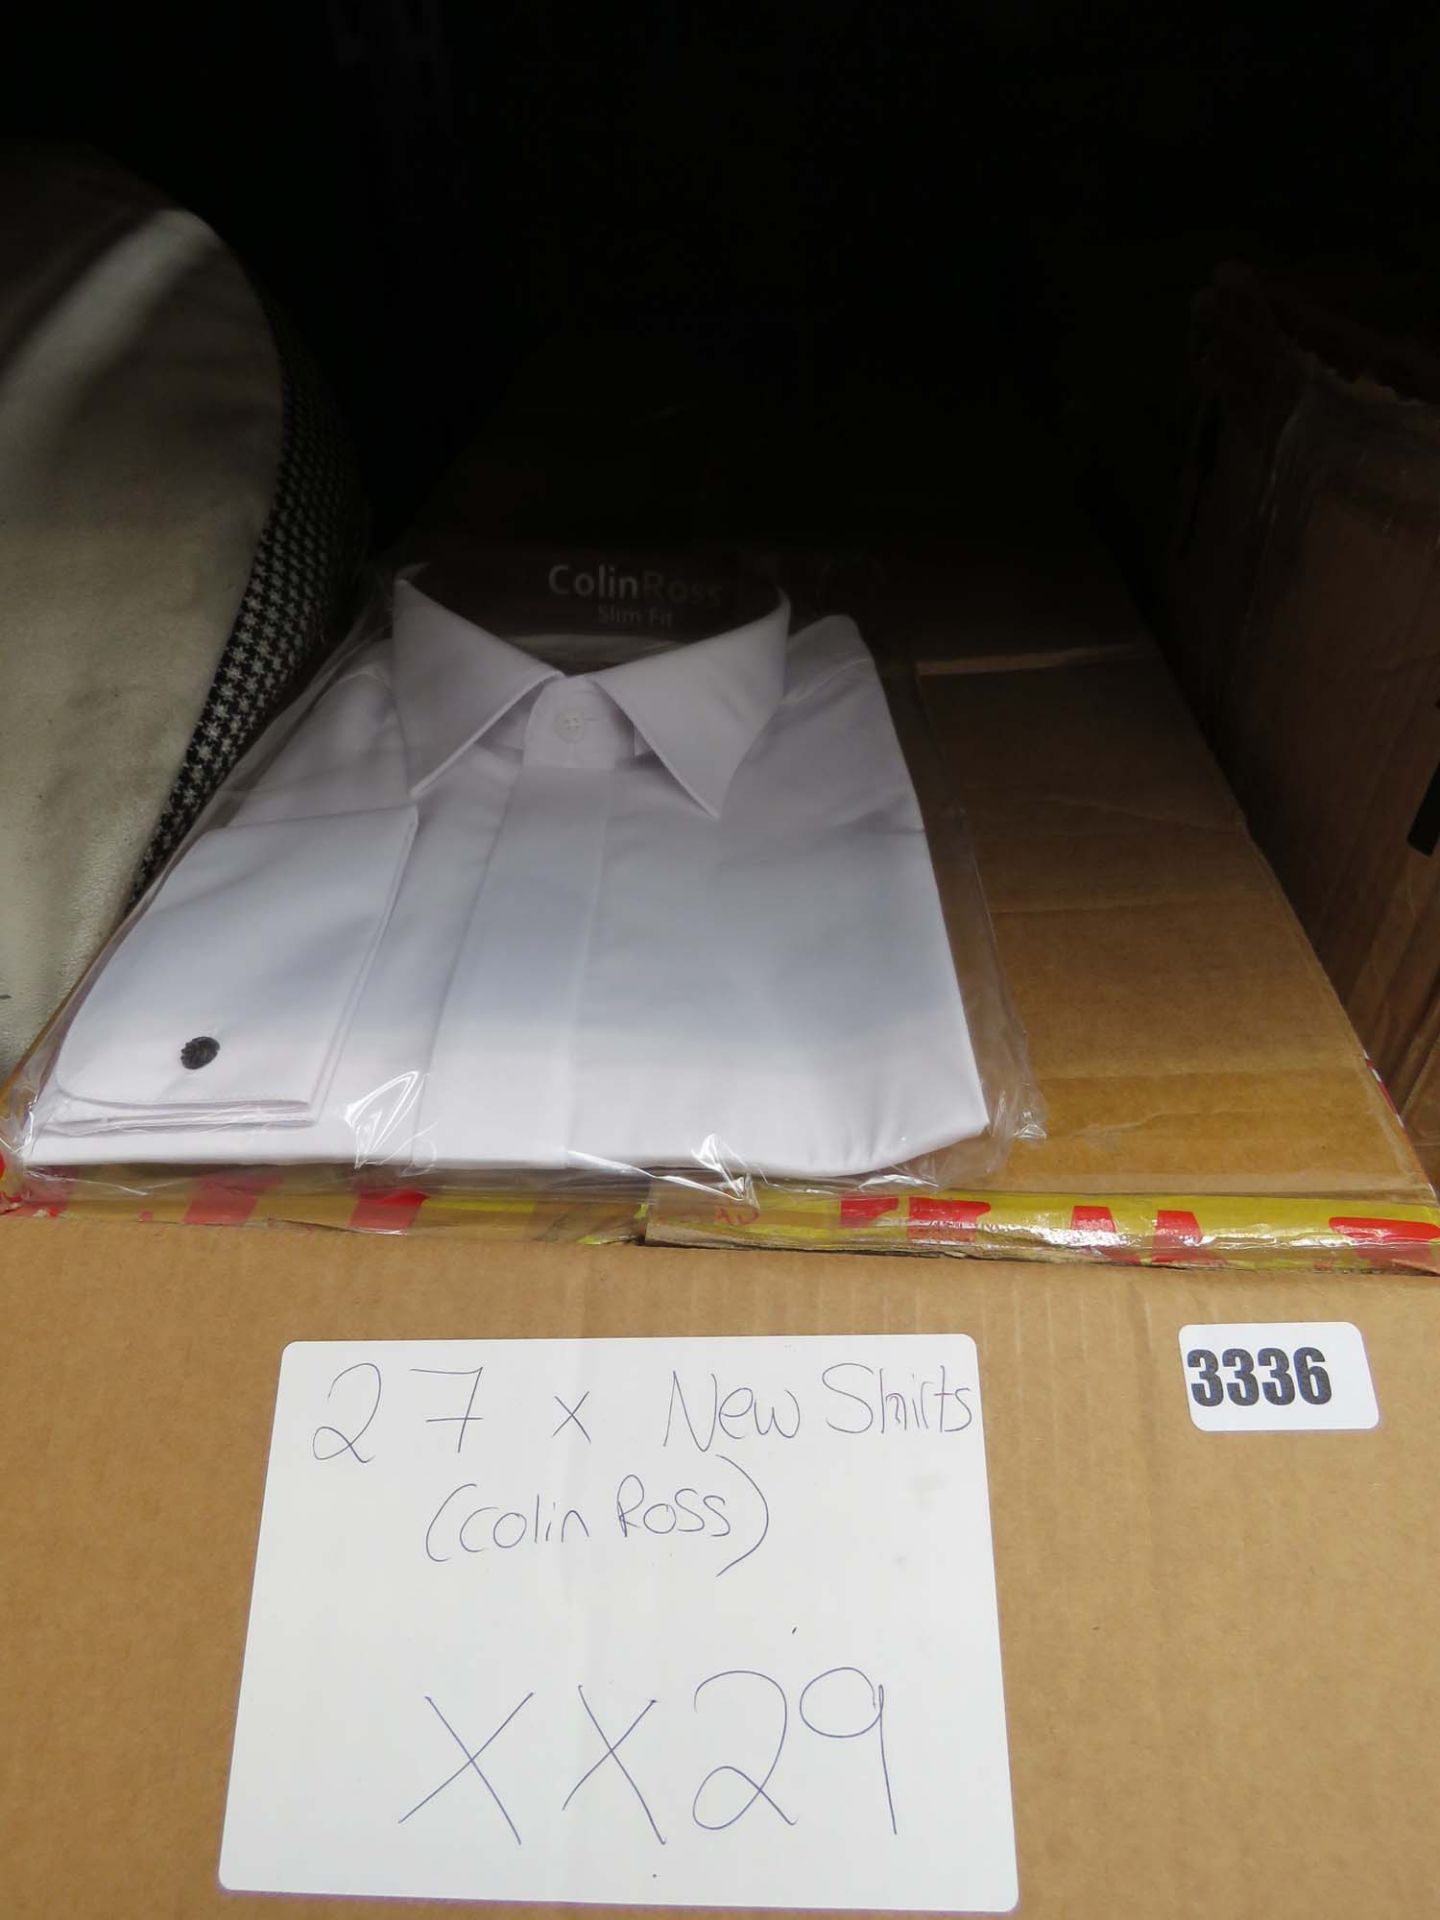 Box containing 27 Colin Ross gents shirts